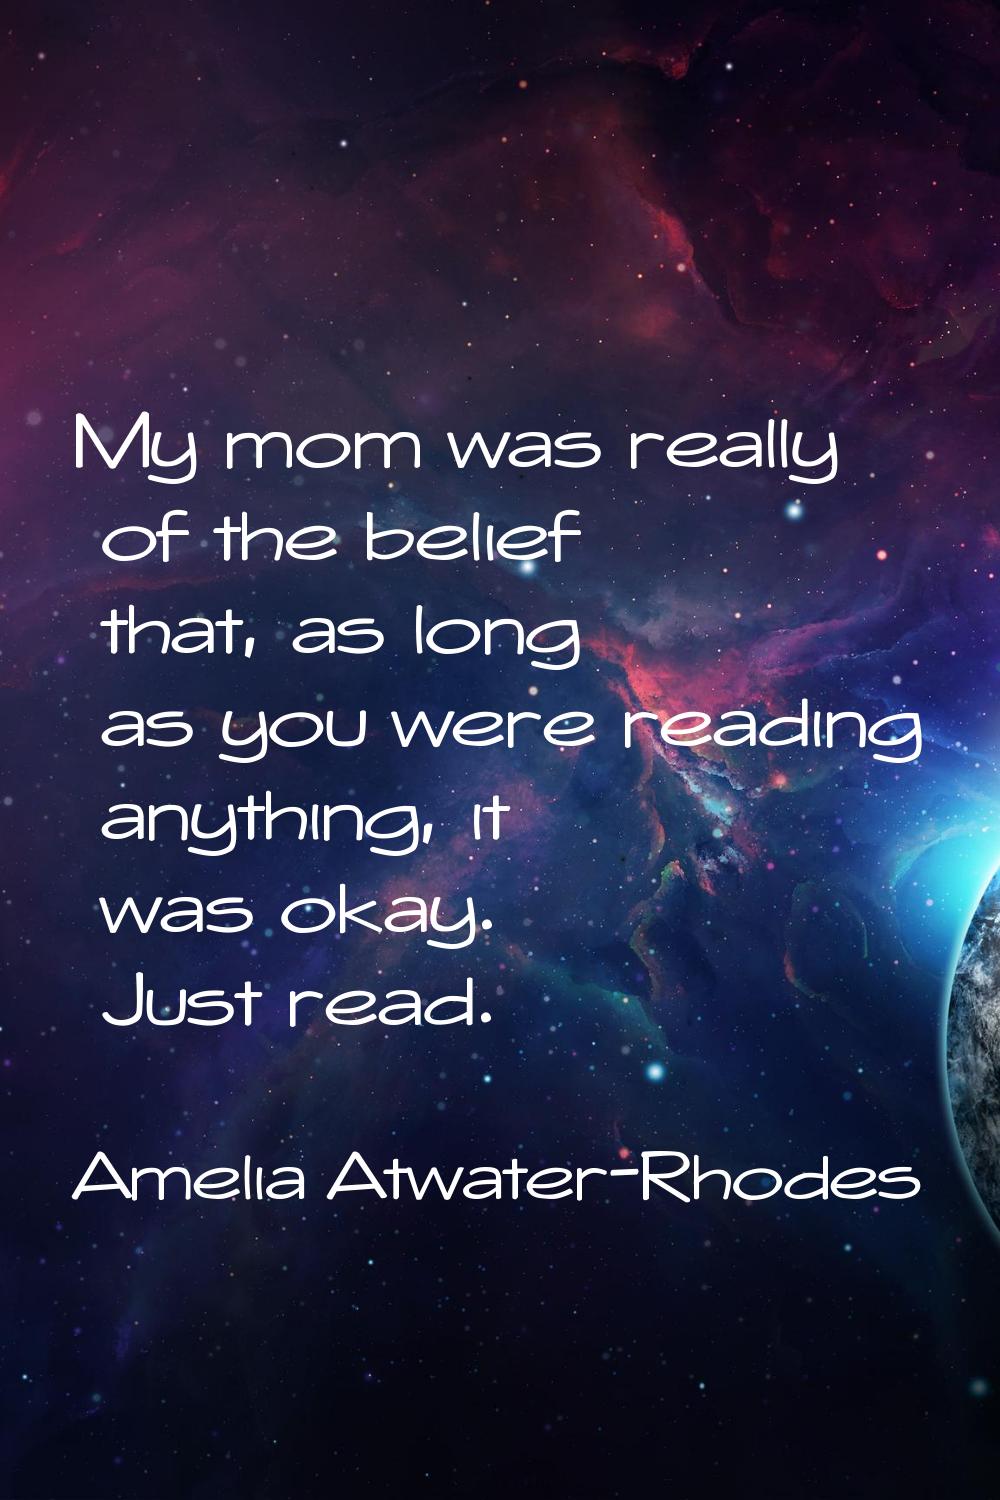 My mom was really of the belief that, as long as you were reading anything, it was okay. Just read.